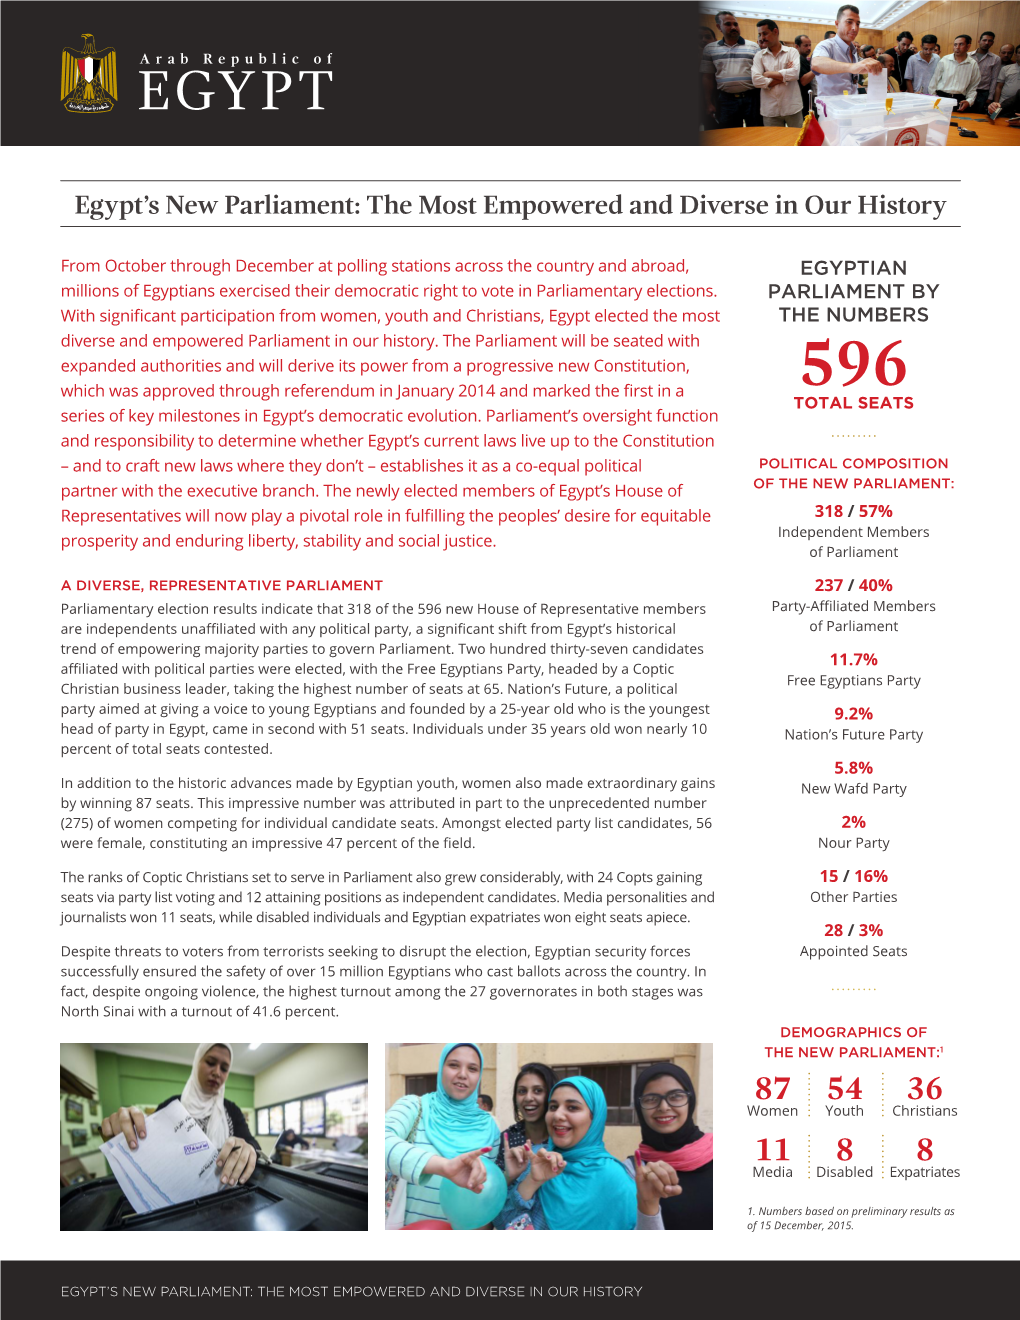 Egypt's New Parliament: the Most Empowered and Diverse in Our